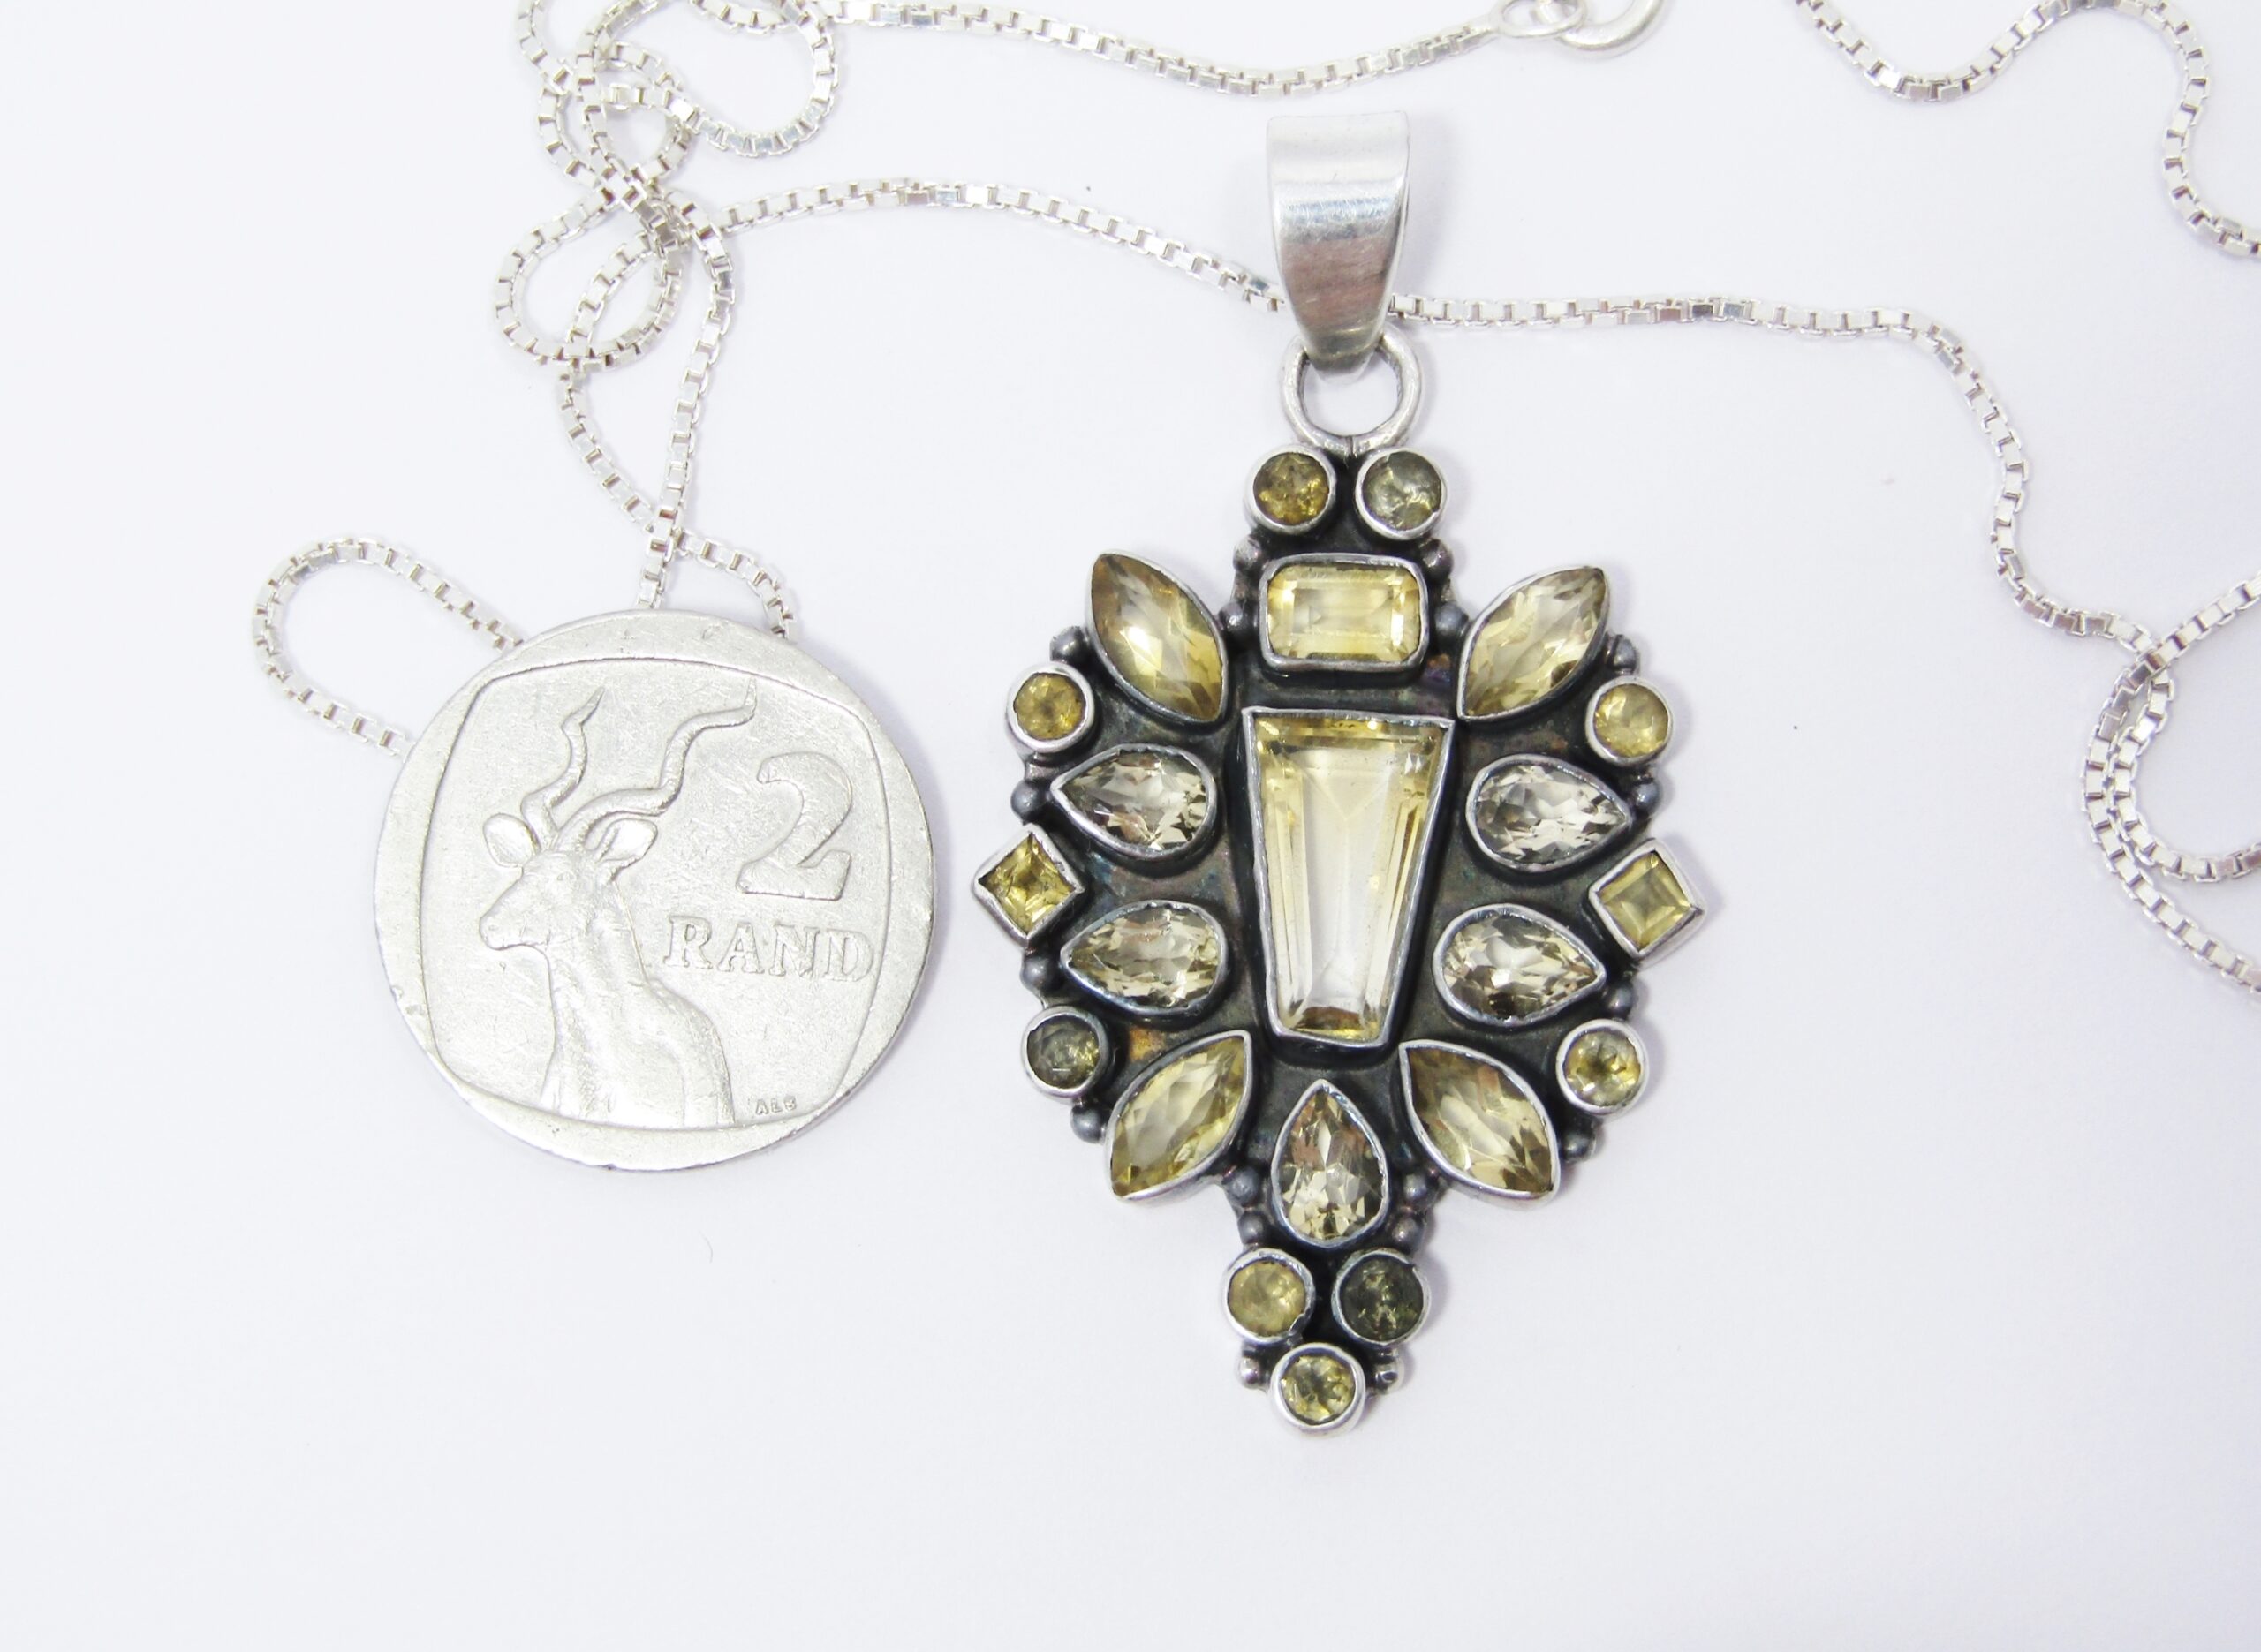 A Stunning Huge Citrine Gemstone Pendant on Chain in Sterling Silver.